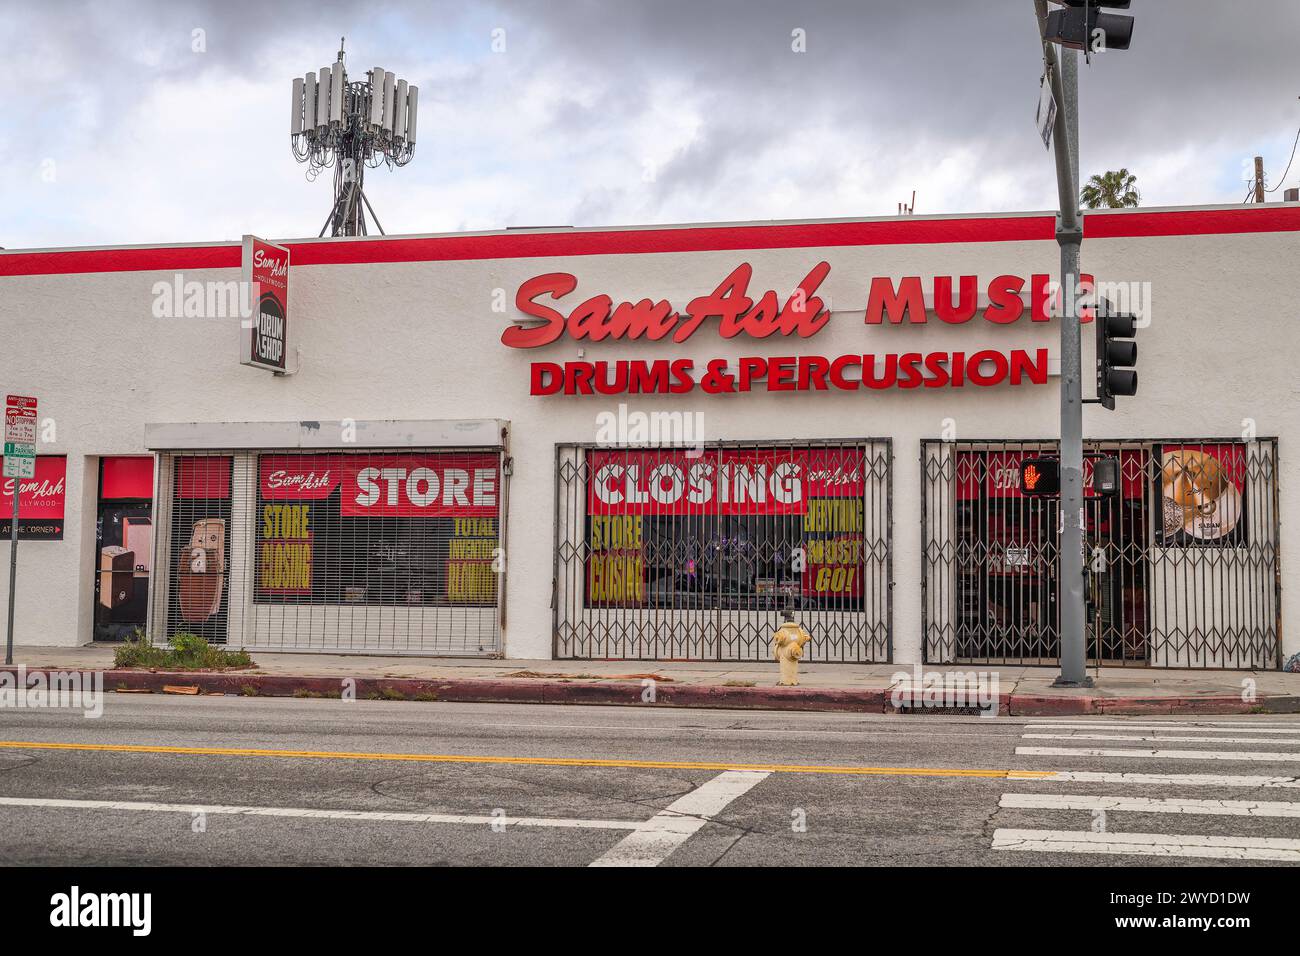 Los Angeles, CA, USA – April 5, 2024: Exterior of Sam Ash Music store on Sunset boulevard advertises its store closure in Los Angeles, CA. Stock Photo